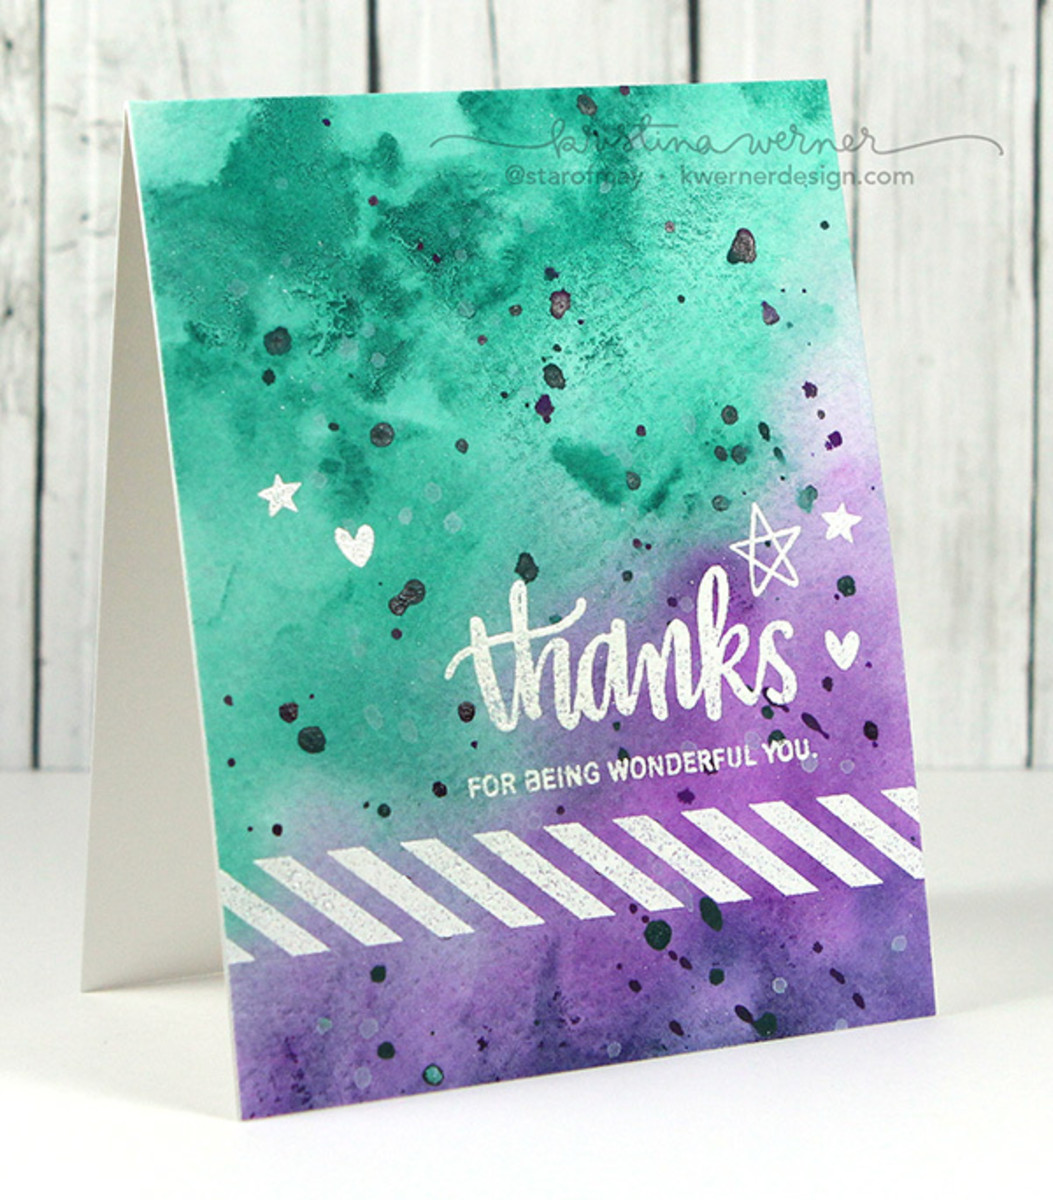 Watercolors can be used for background for greeting cards